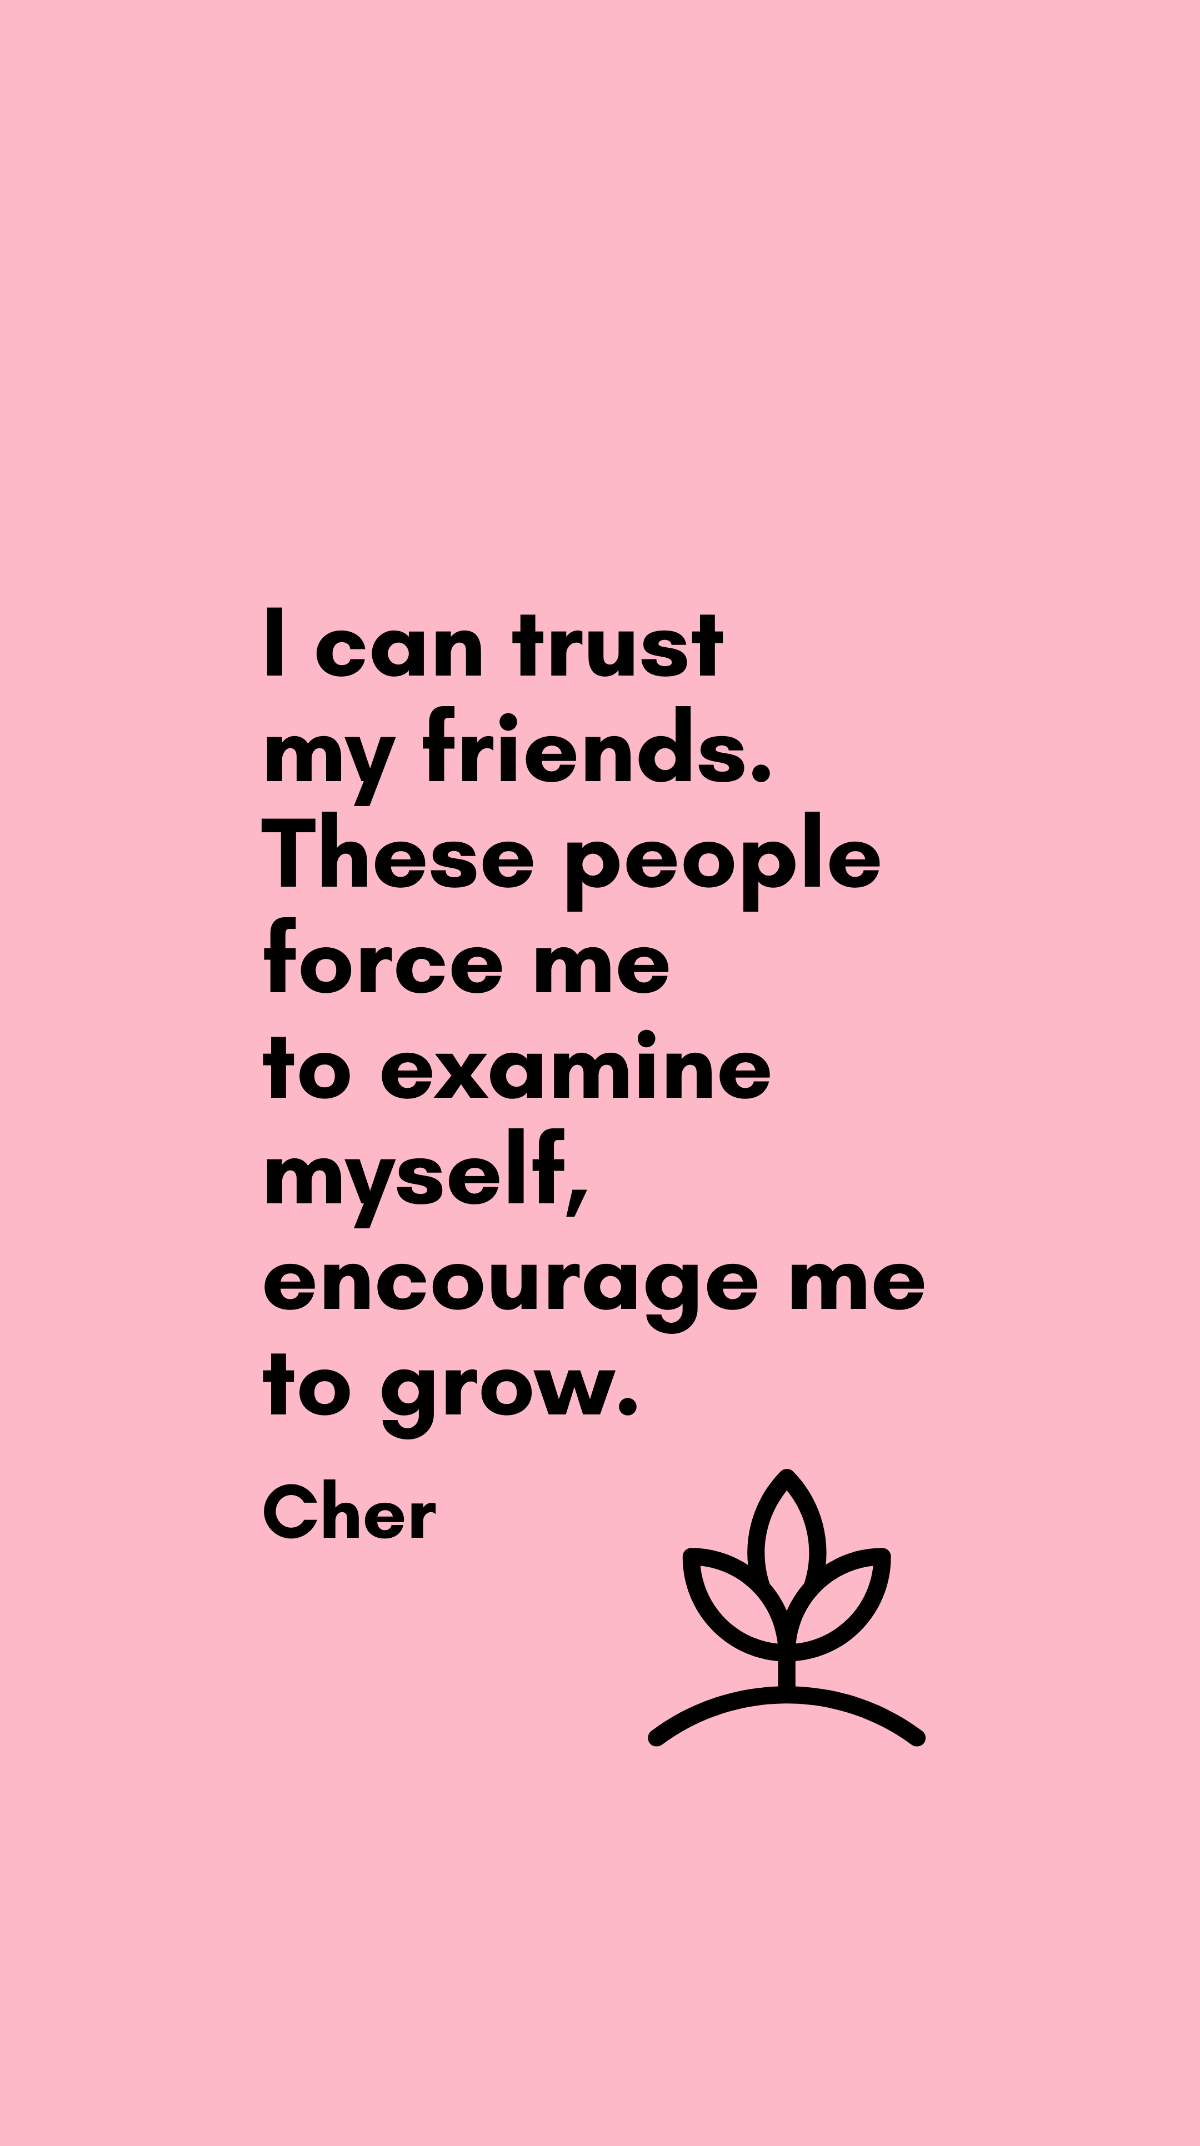 Cher - I can trust my friends. These people force me to examine myself, encourage me to grow. Template